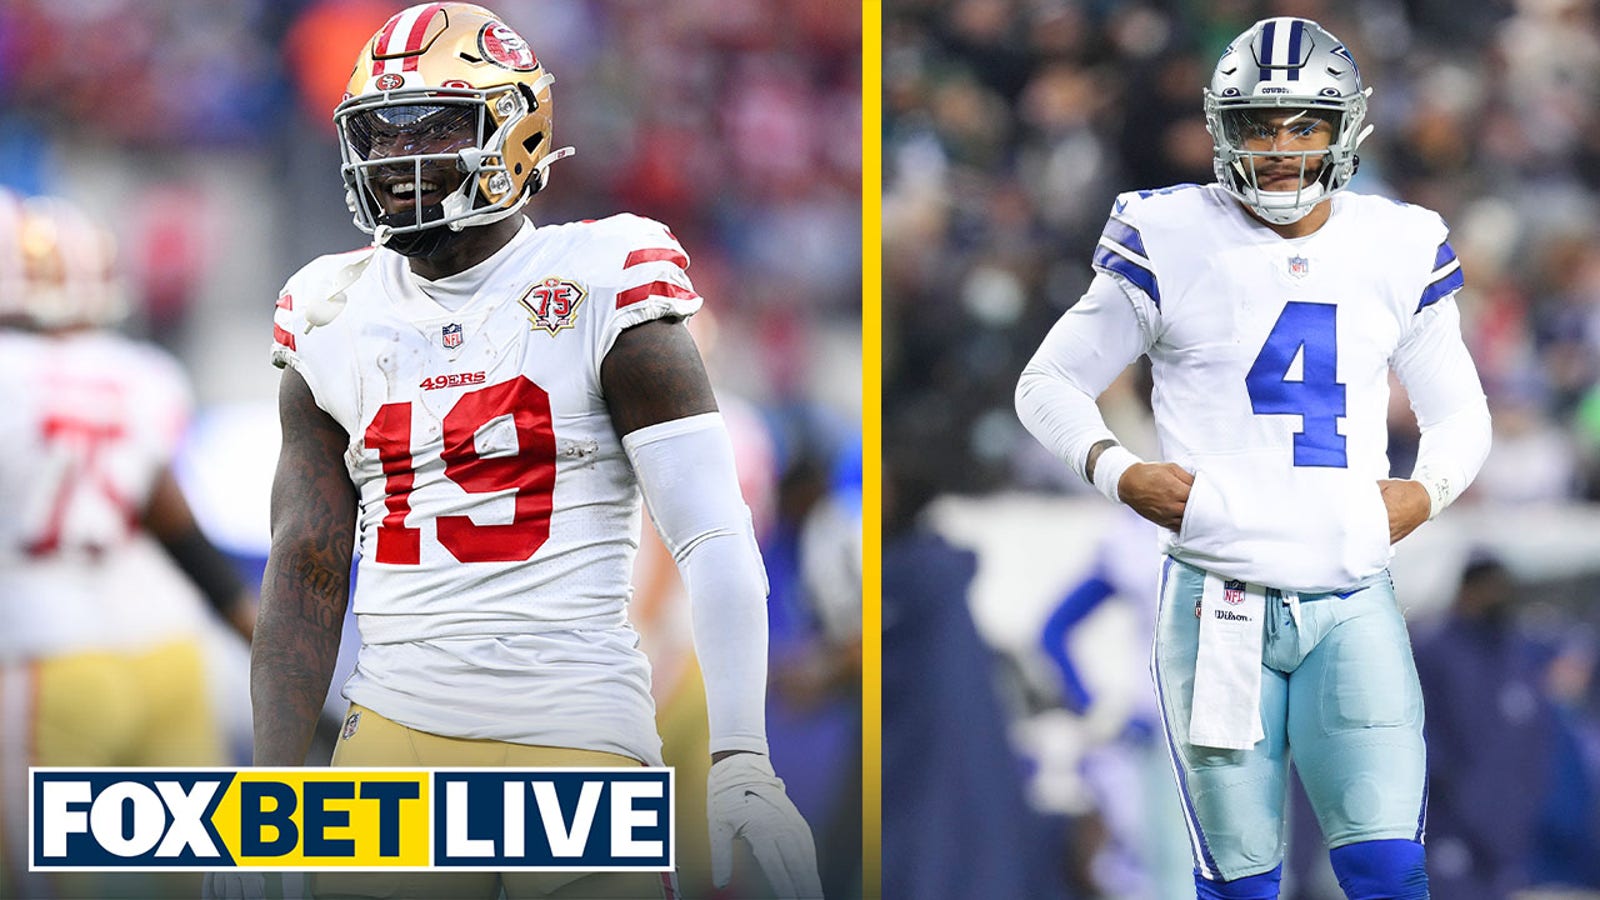 Colin Cowherd: Bet the over and 49ers to cover I FOX BET LIVE